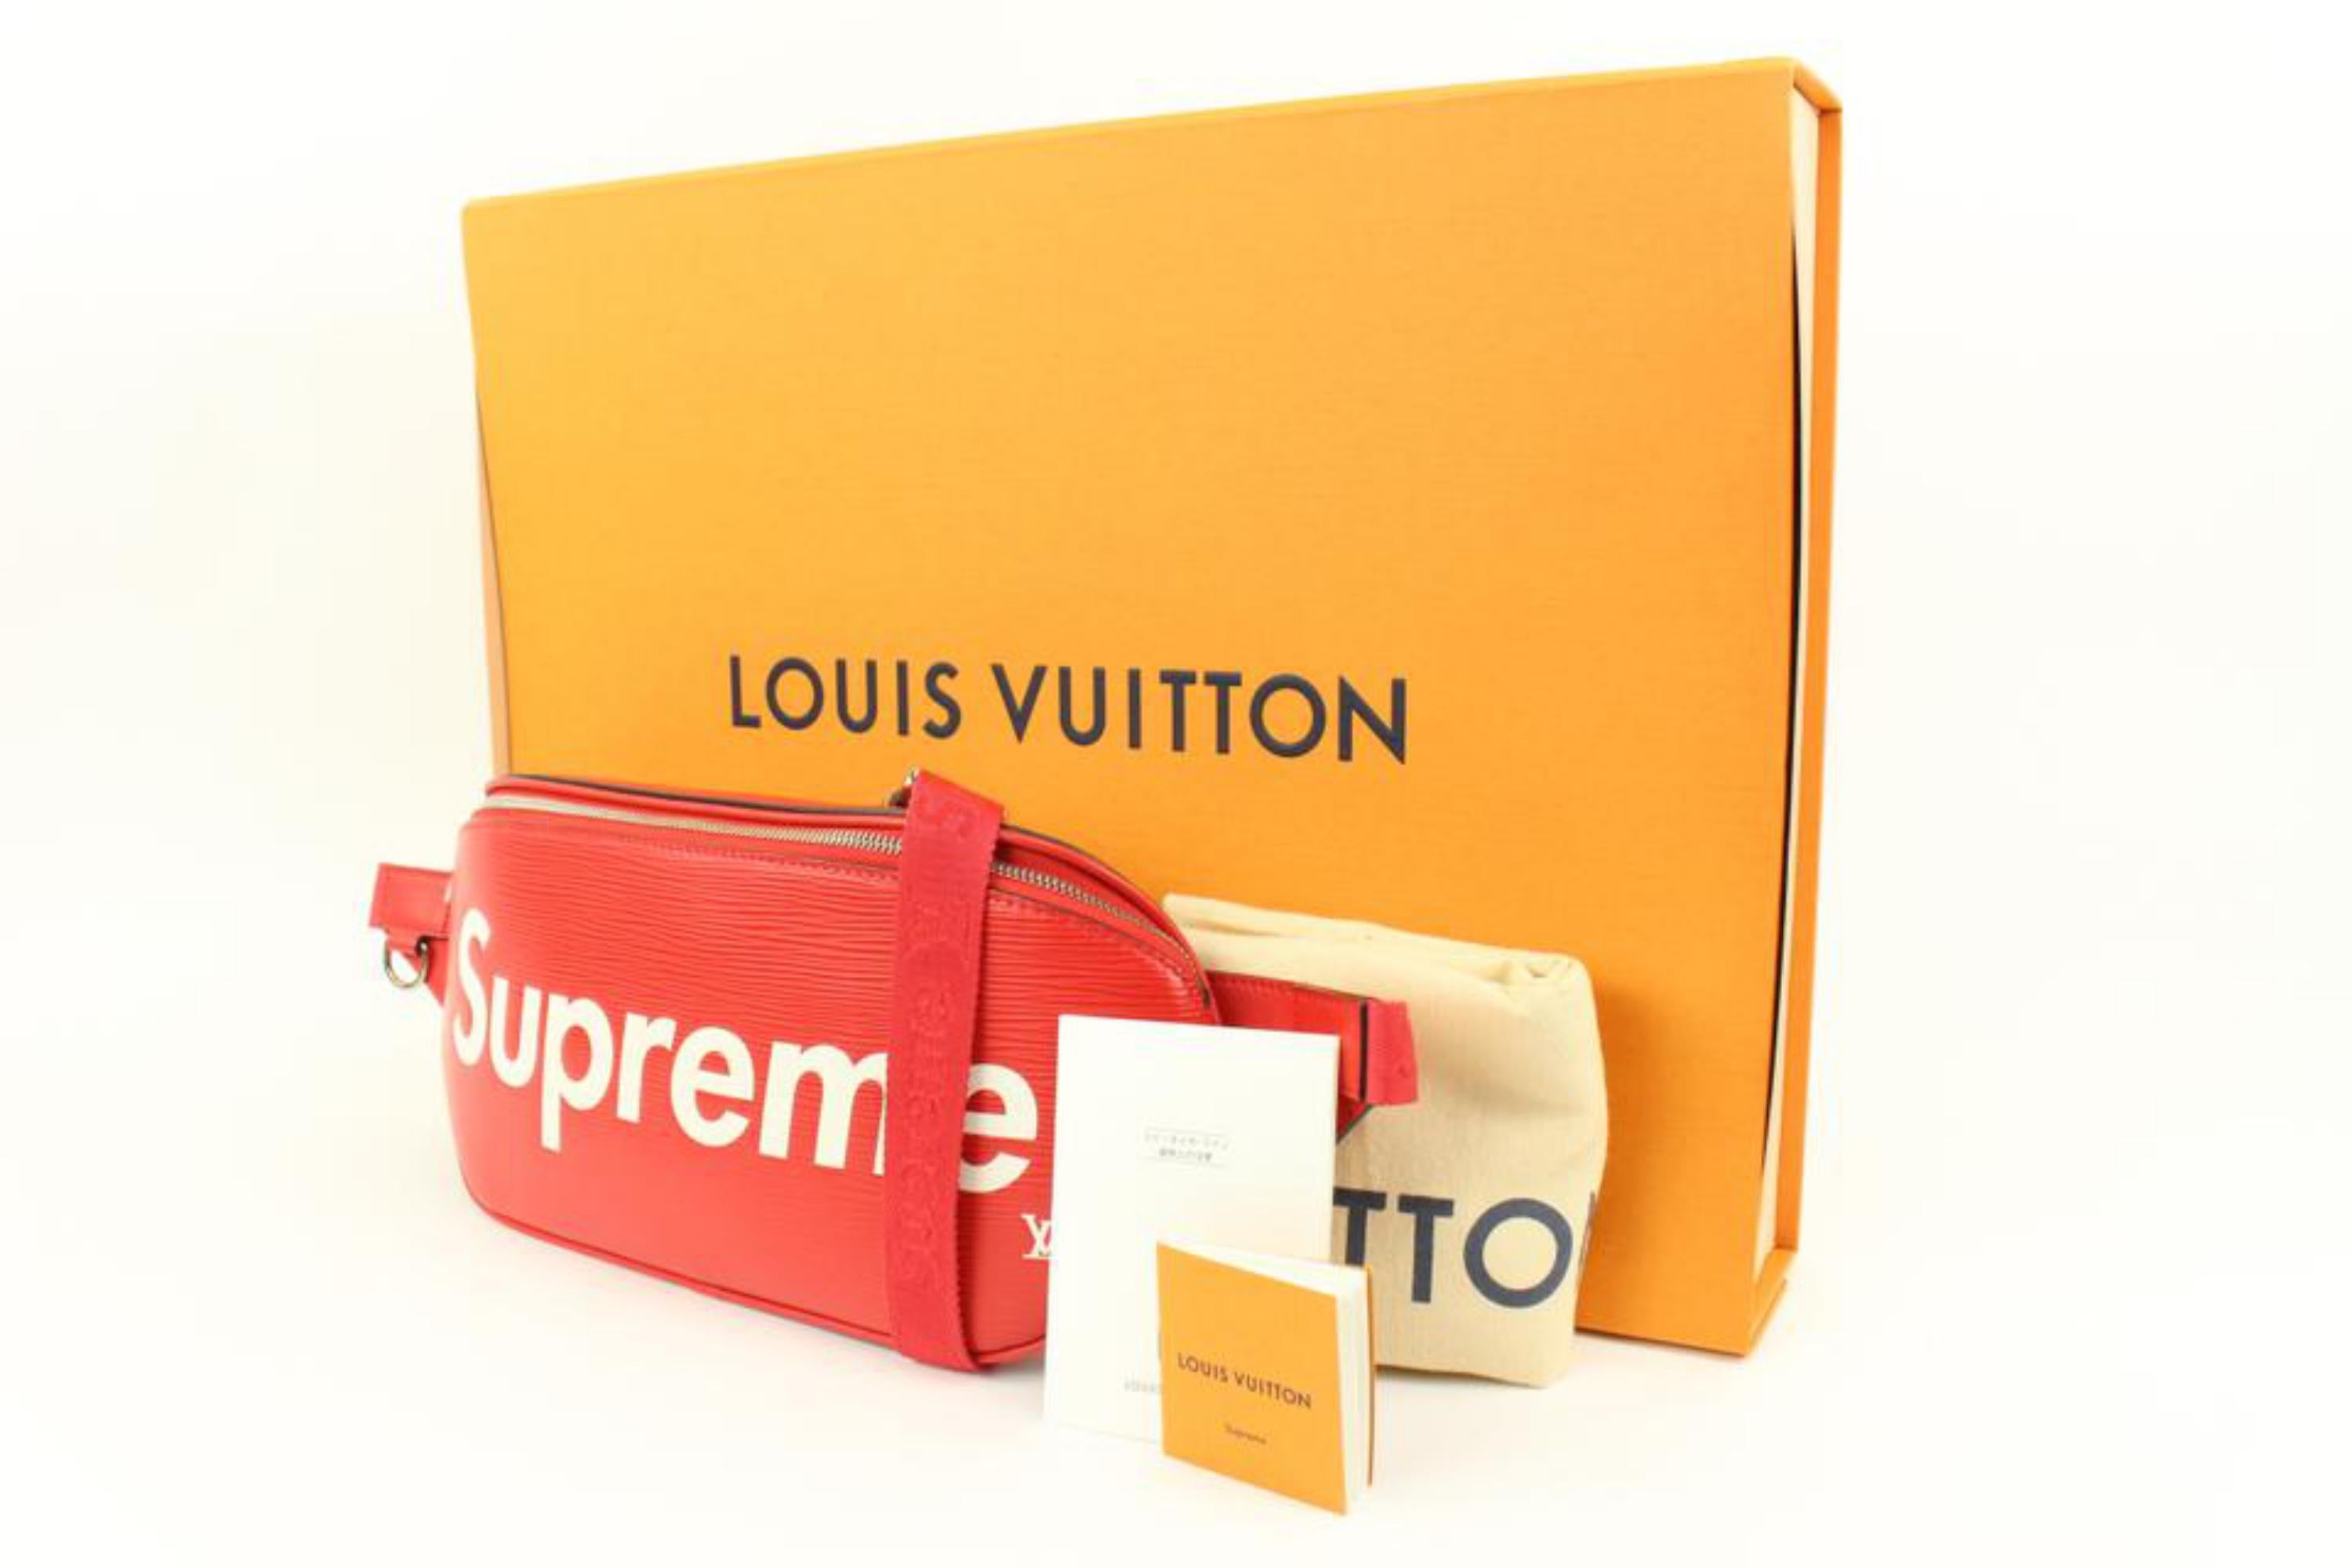 Louis Vuitton x Supreme LV X Supreme Red Epi Bumbag 3lk310s
Date Code/Serial Number: NZ2117
Made In: Italy
Measurements: Length:  12.5